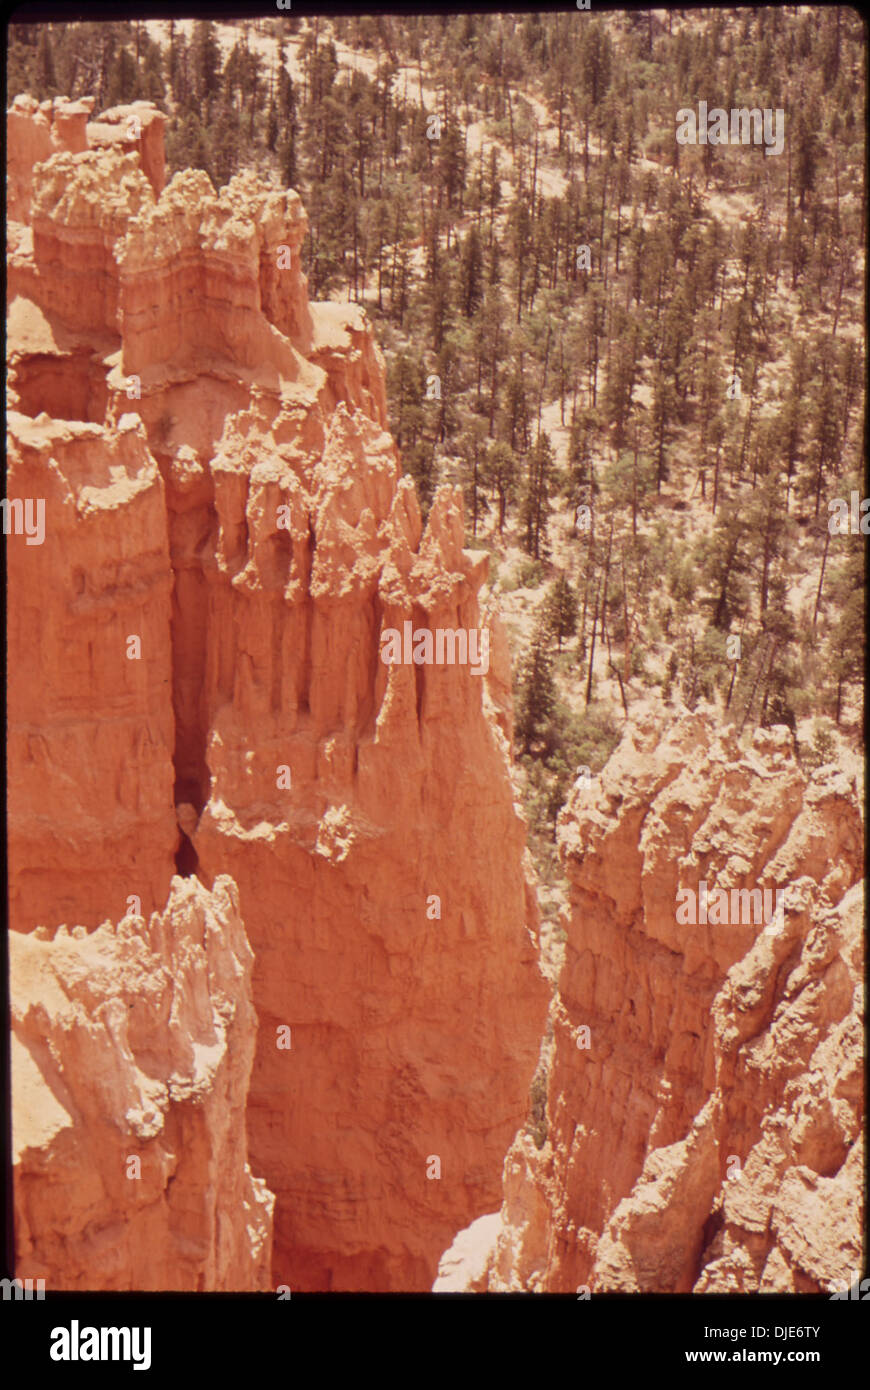 ROCK SPIRES ARE SCULPTURED BY EROSION AND ARE RED-HUED BY THE PRESENCE OF IRON OXIDE 910 Stock Photo